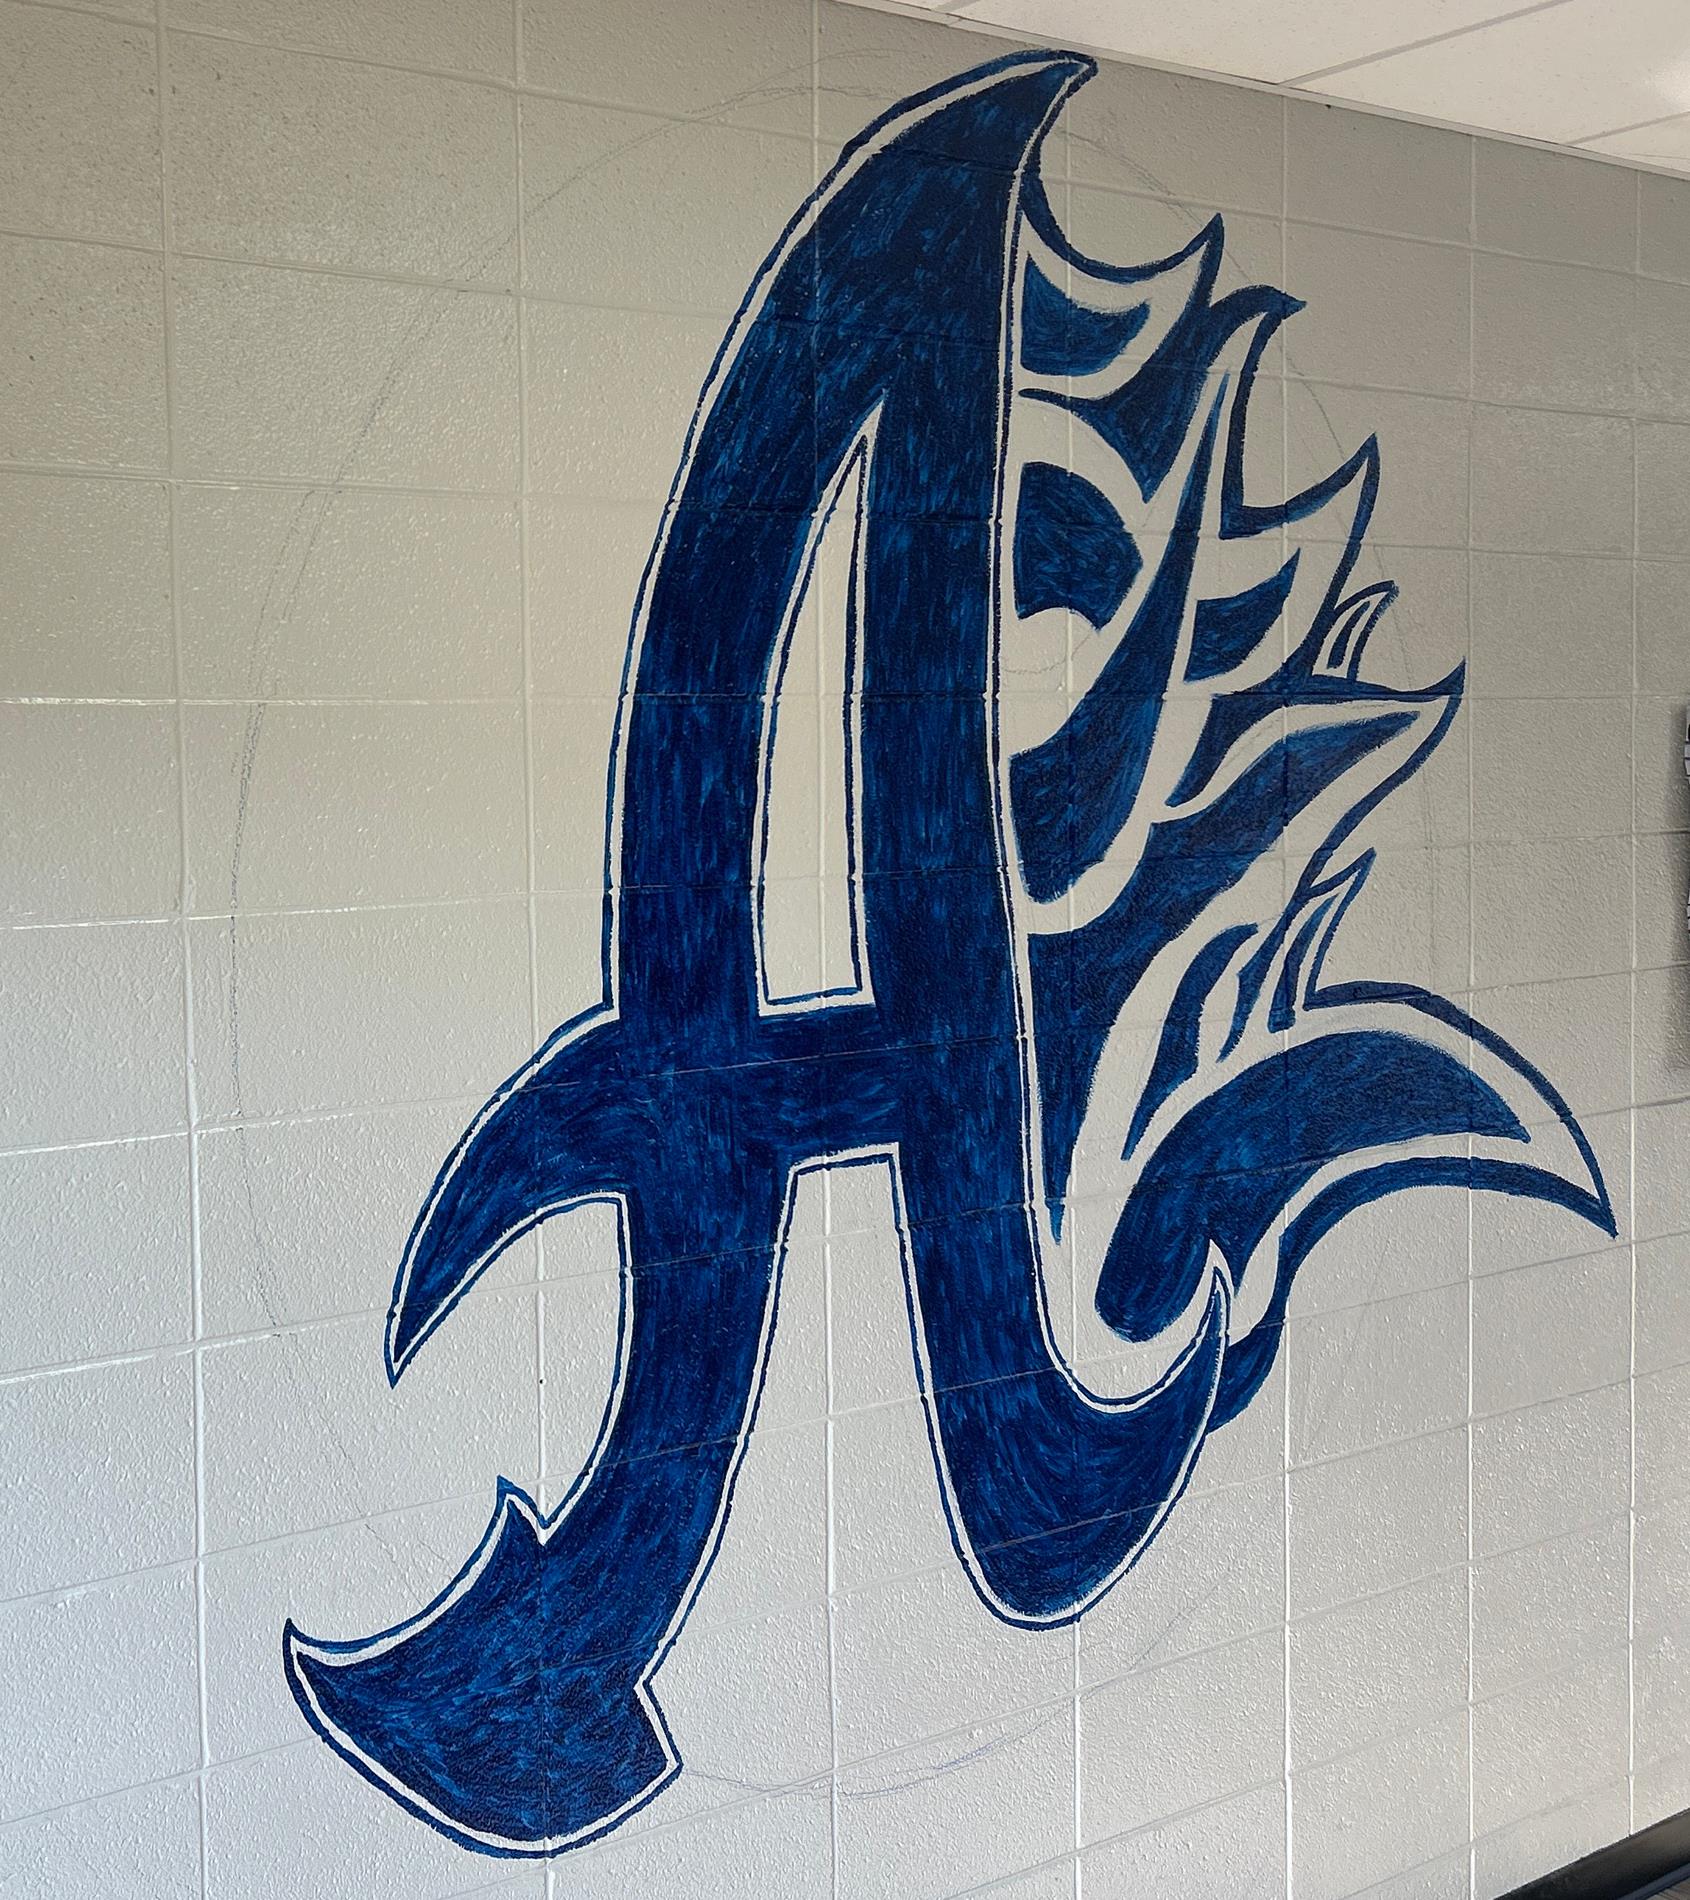 "A" mural on wall